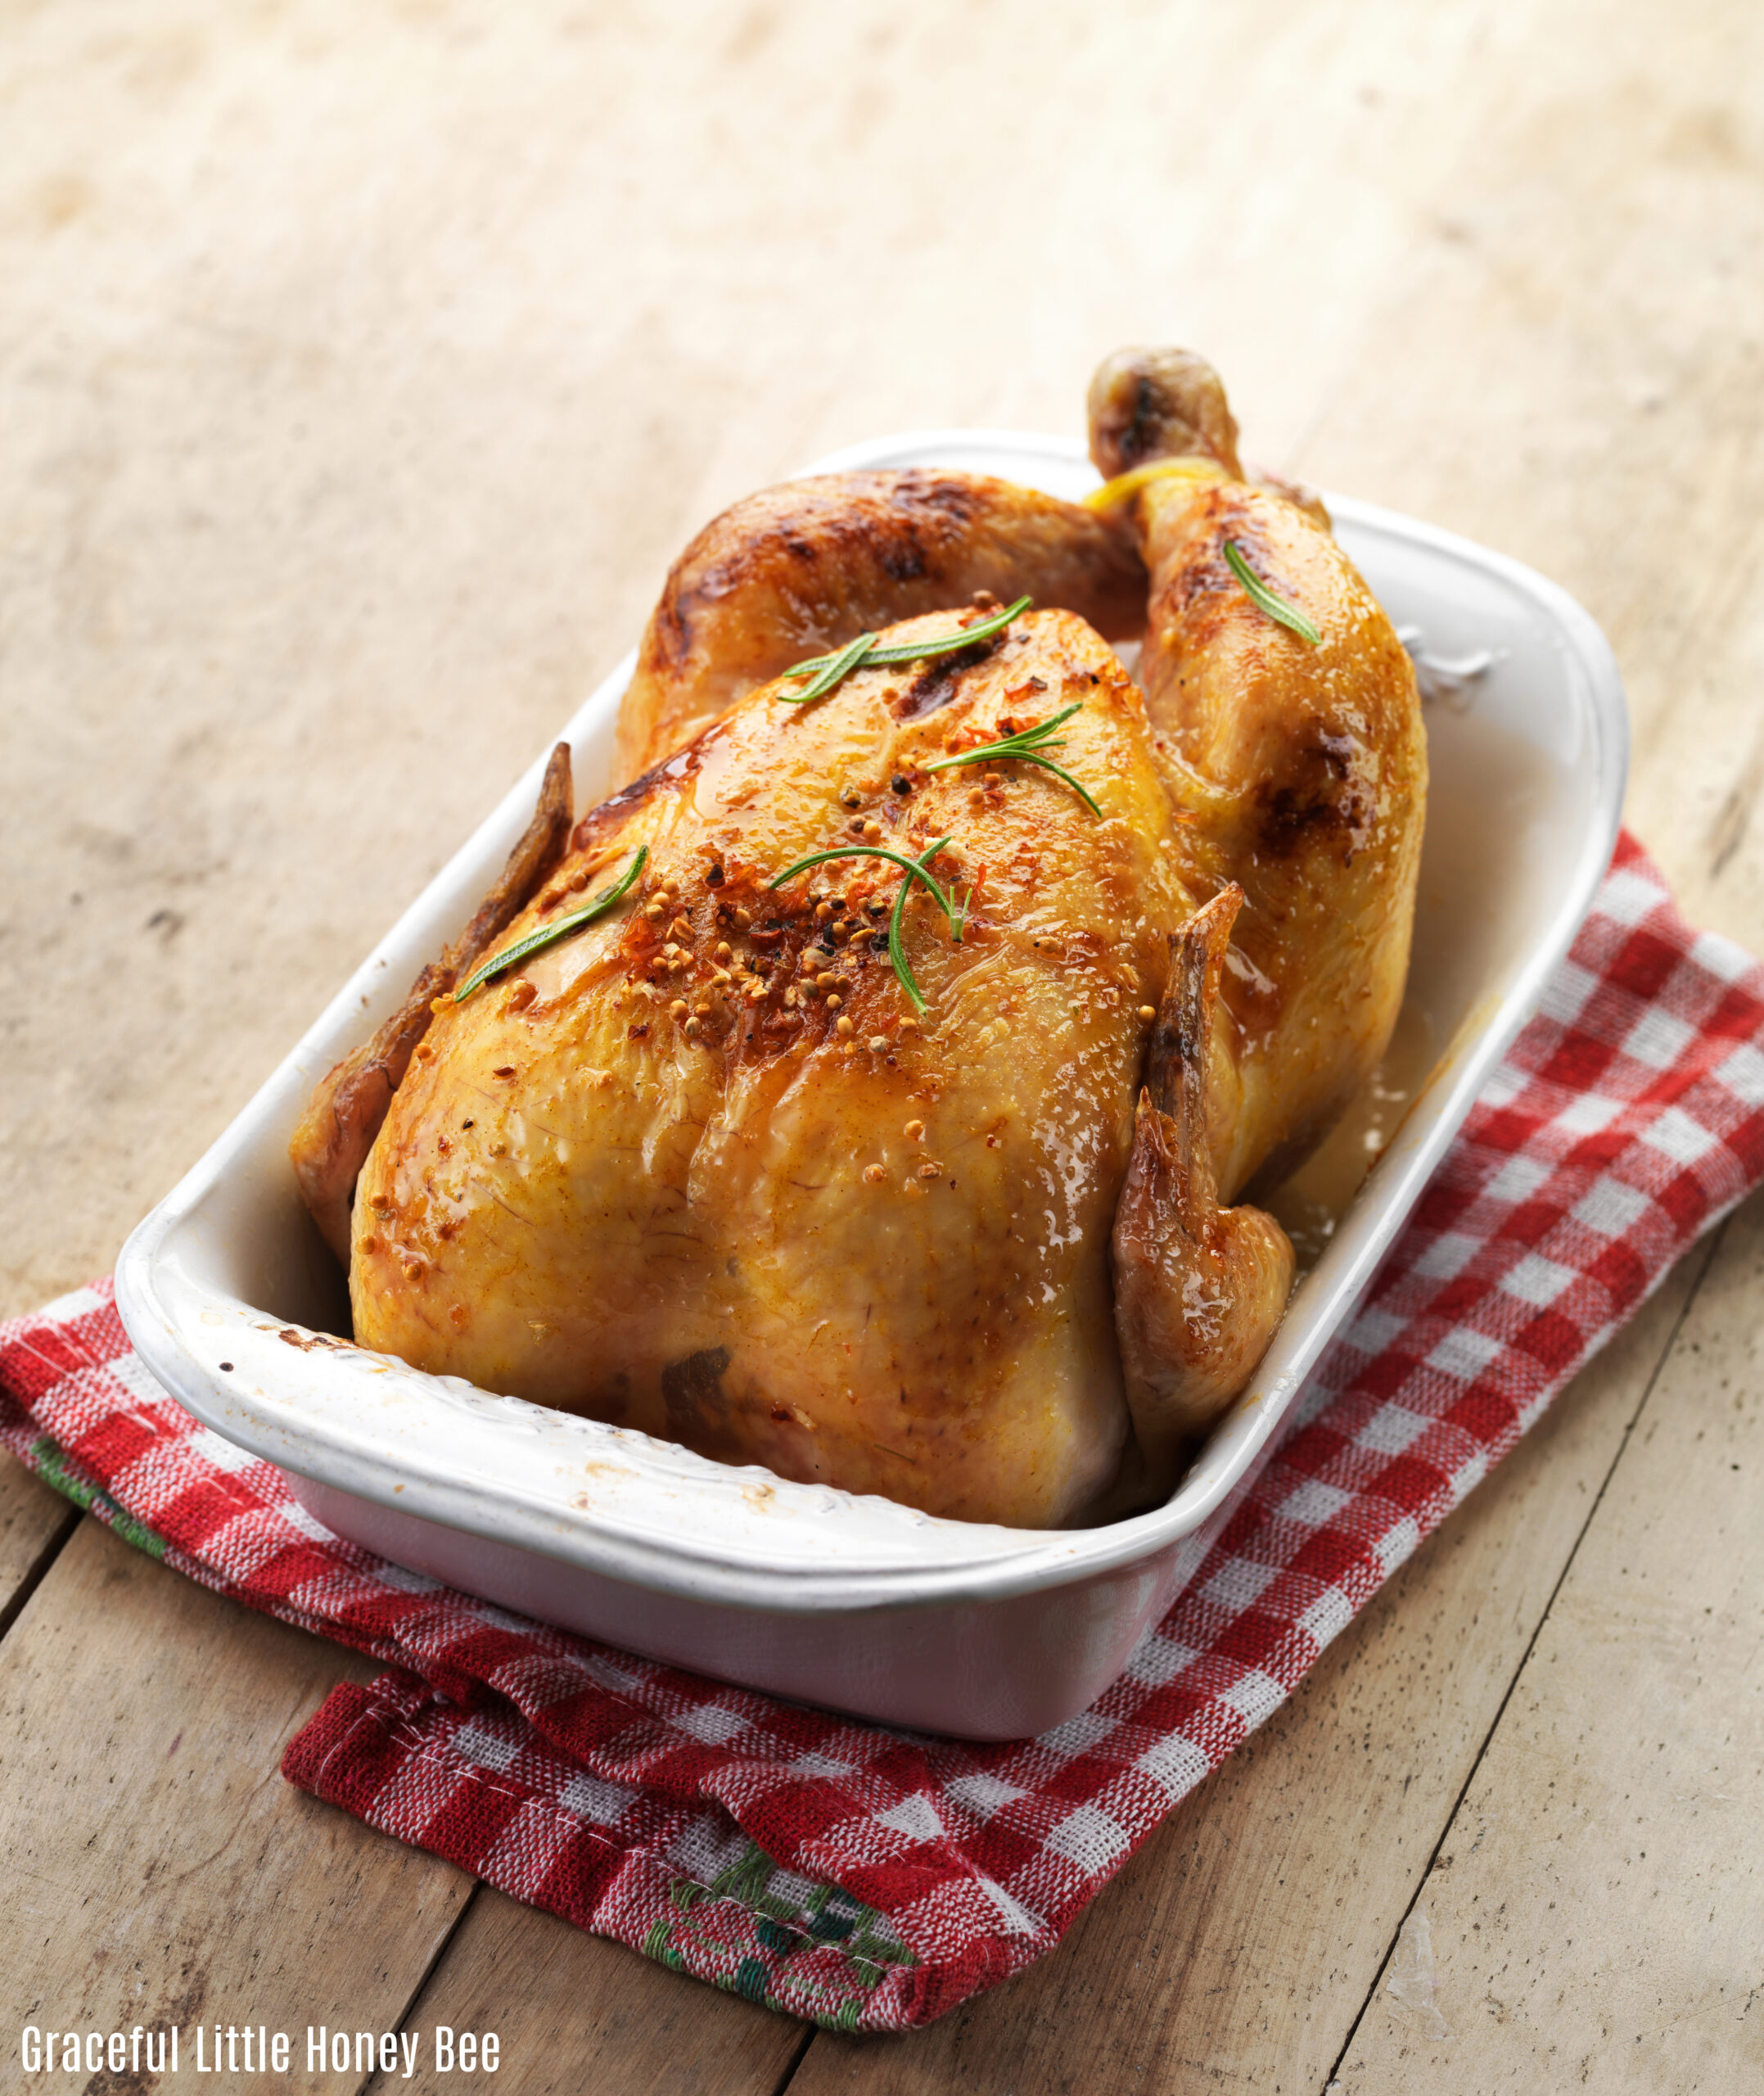 Roast chicken in a white baking dish sitting on a red and white checkered dishcloth.